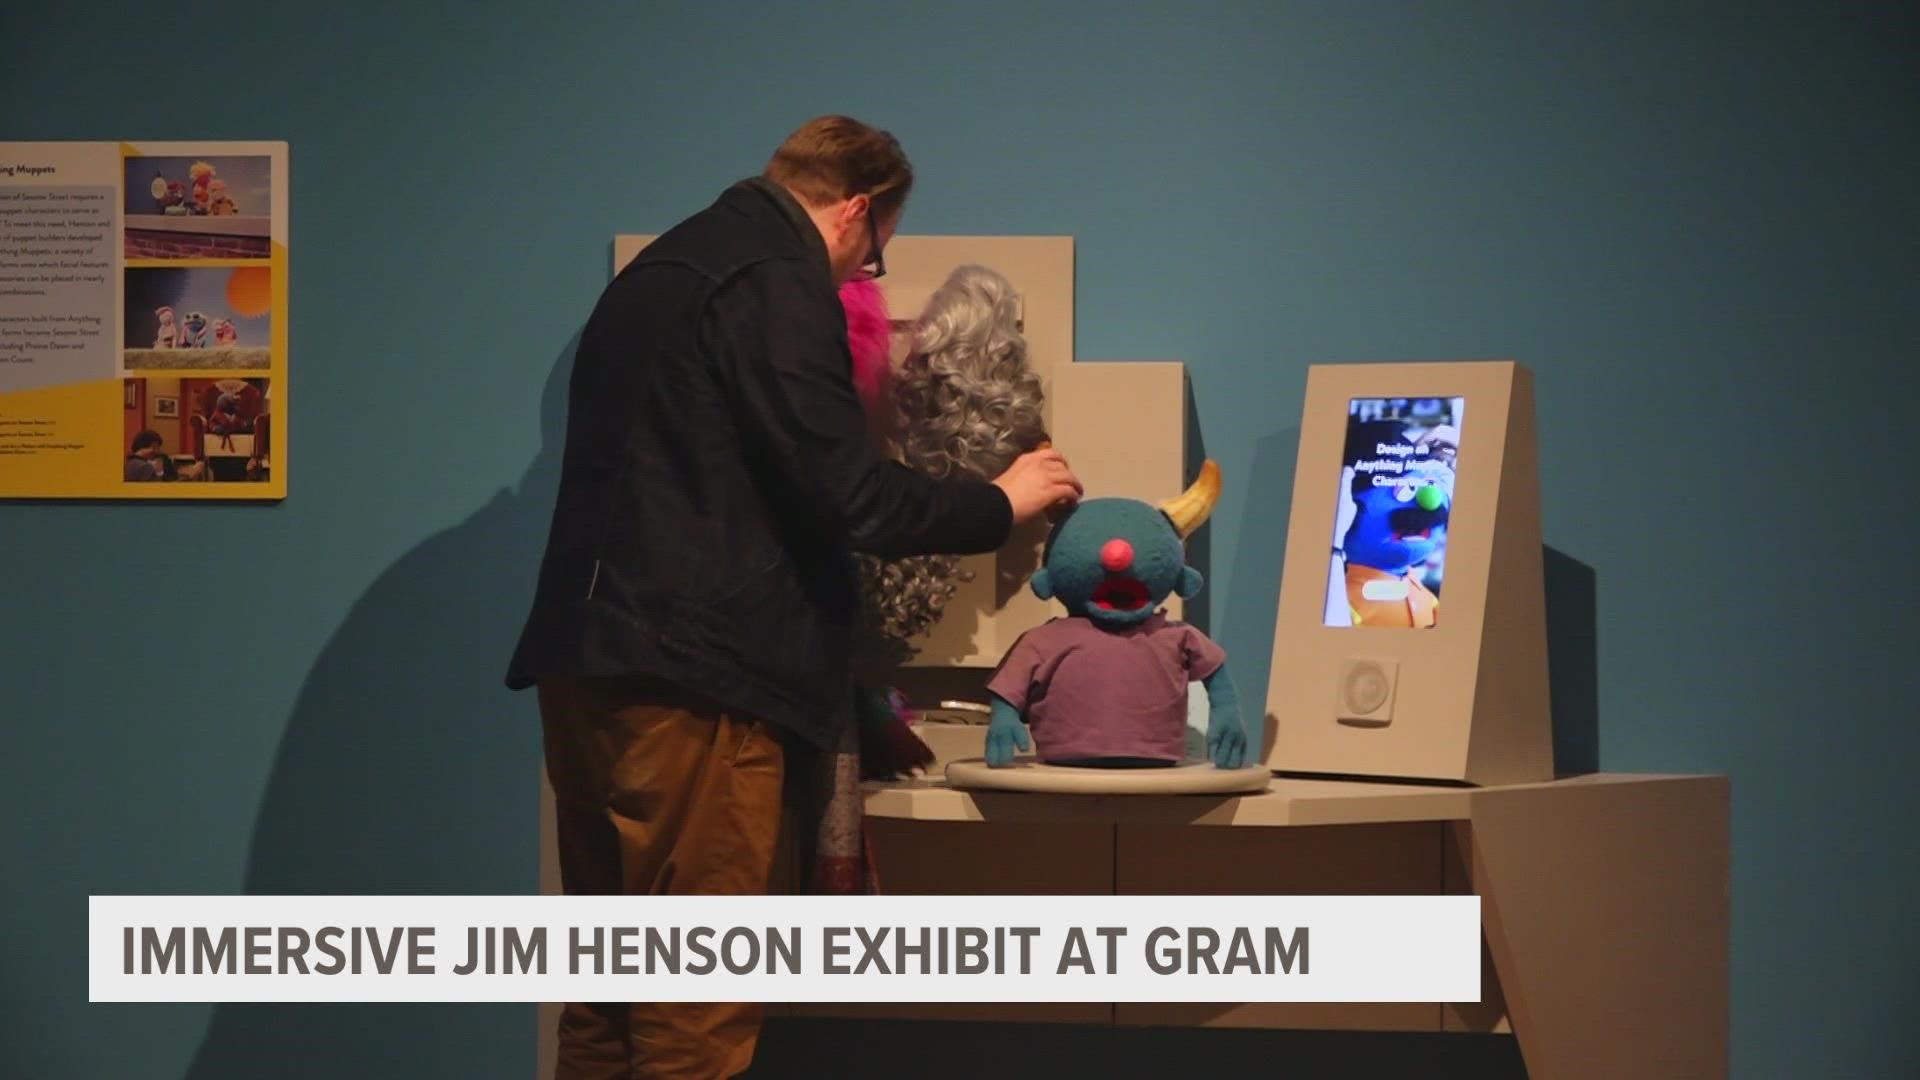 Get ready to let your imagination run wild and immerse yourself in a the Jim Henson exhibition at the Grand Rapids Art Museum.